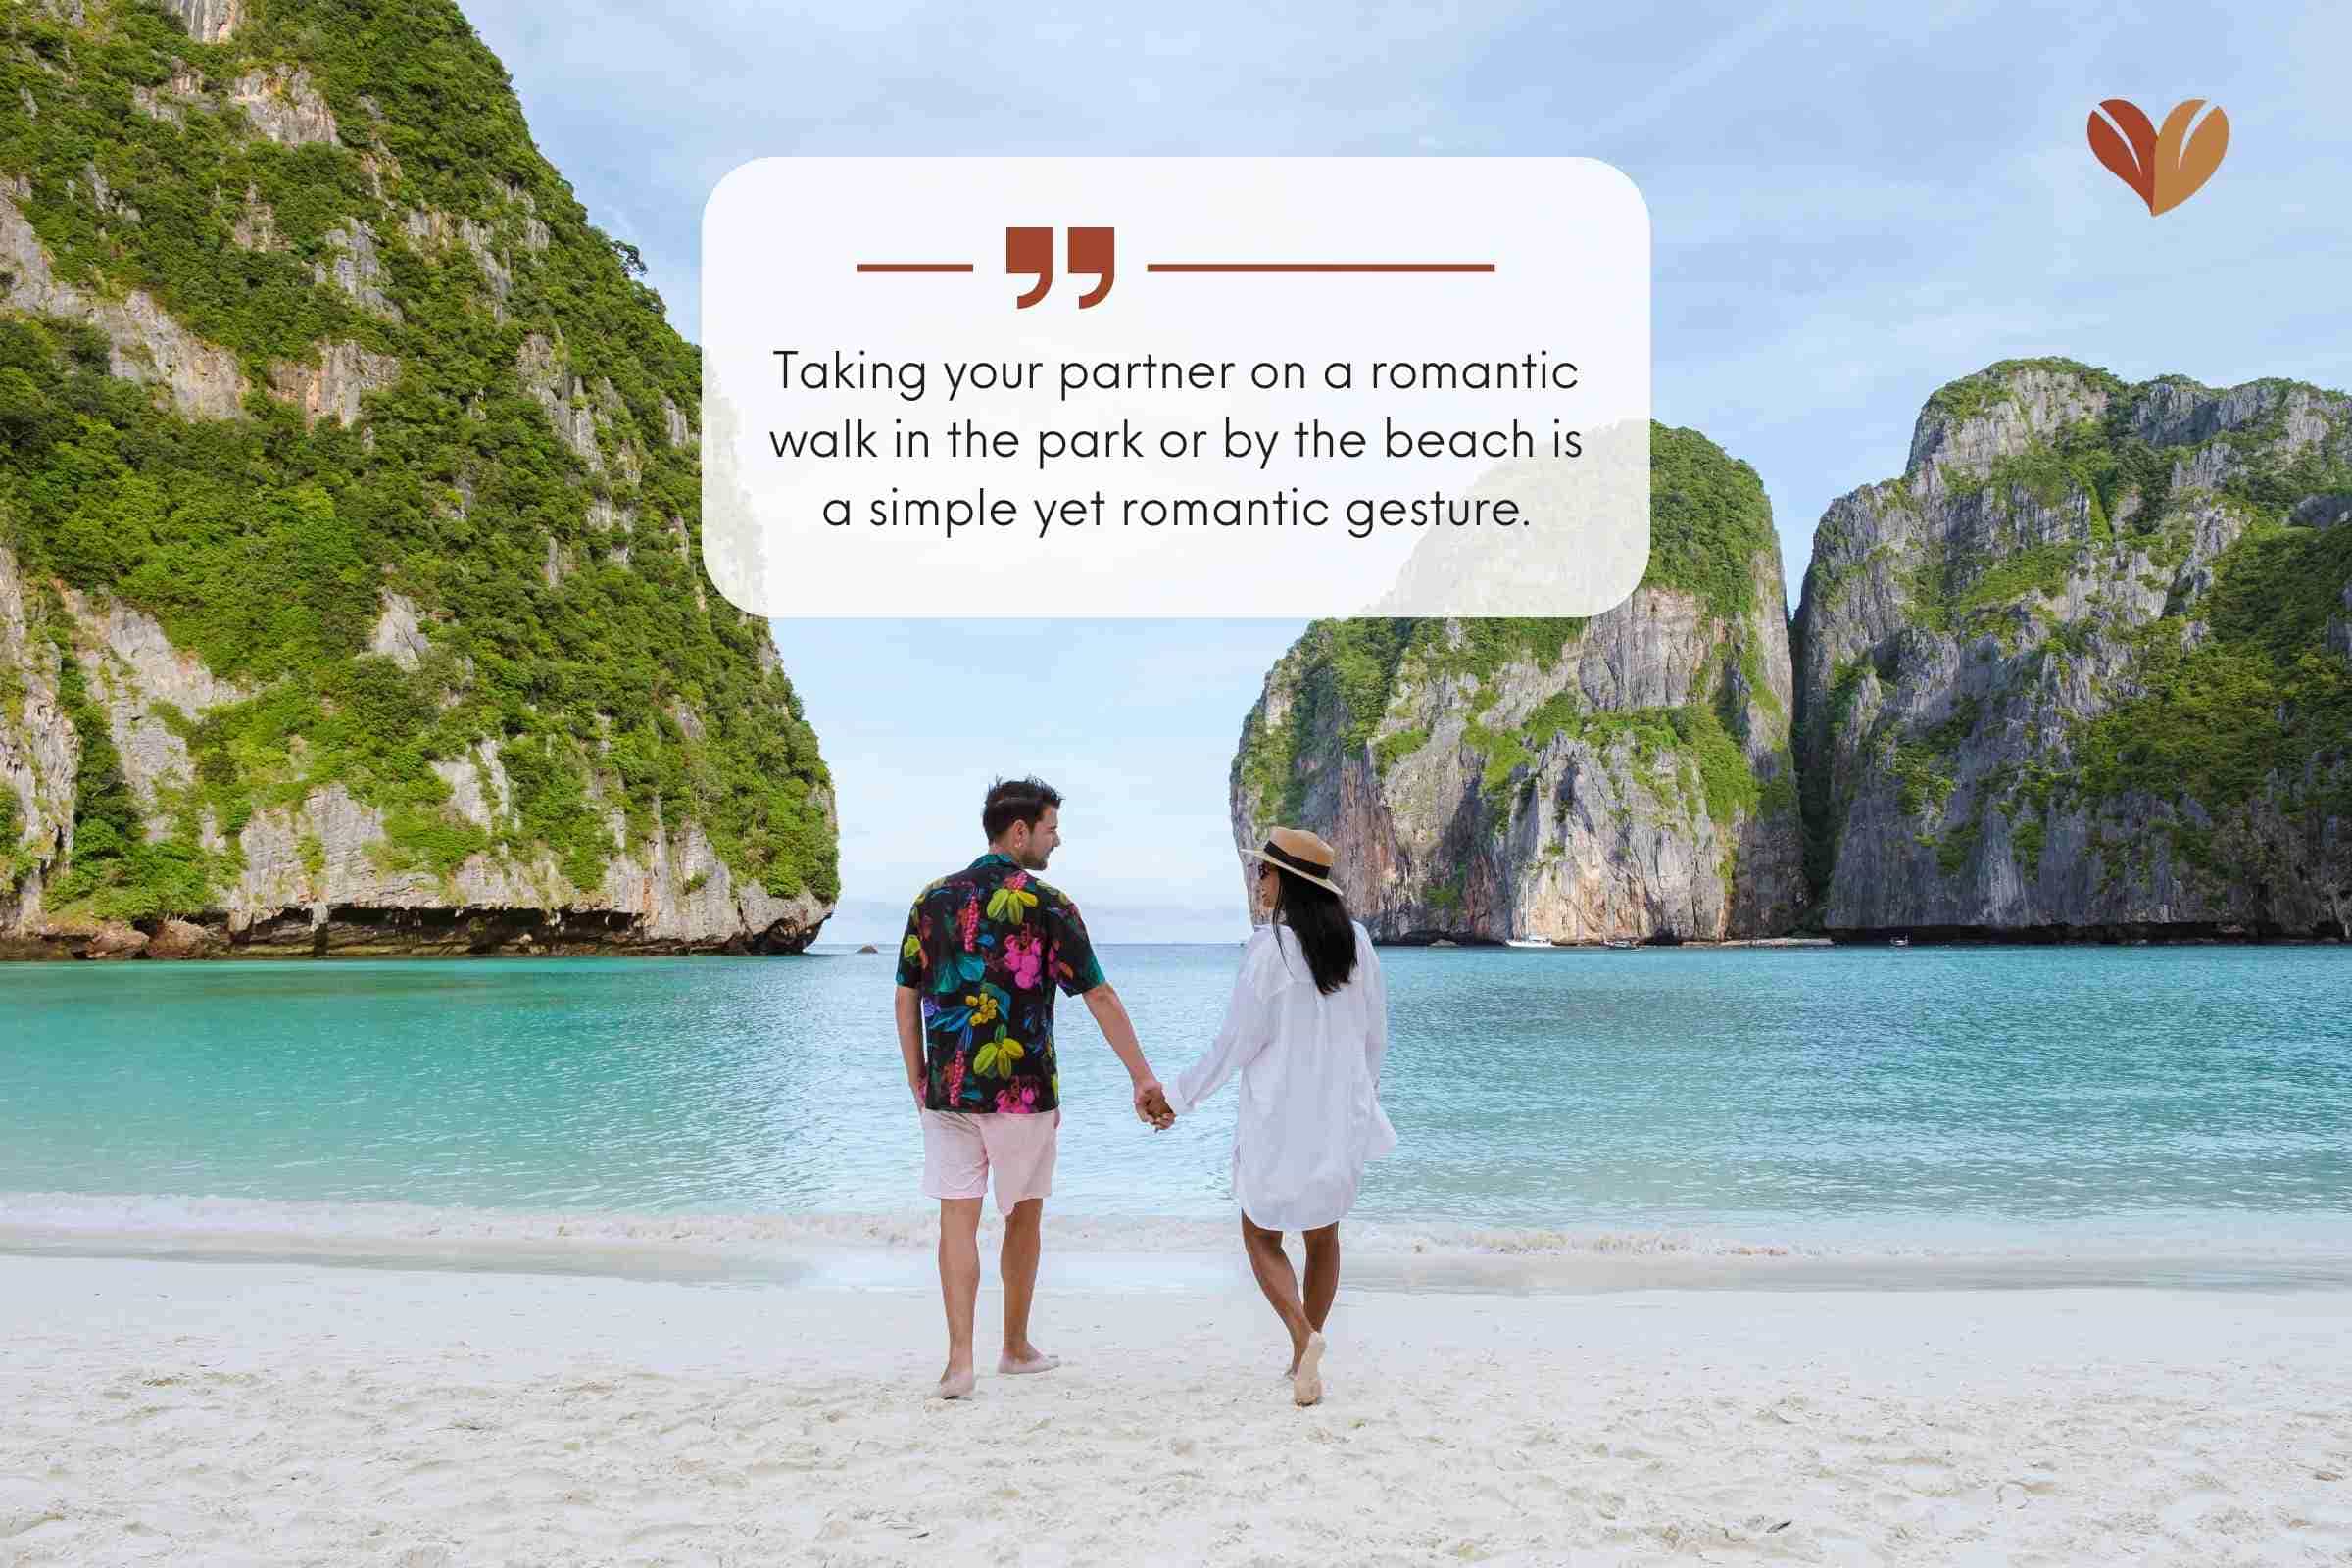 Taking your partner on a romantic walk in the park or by the beach is a simple yet romantic gesture